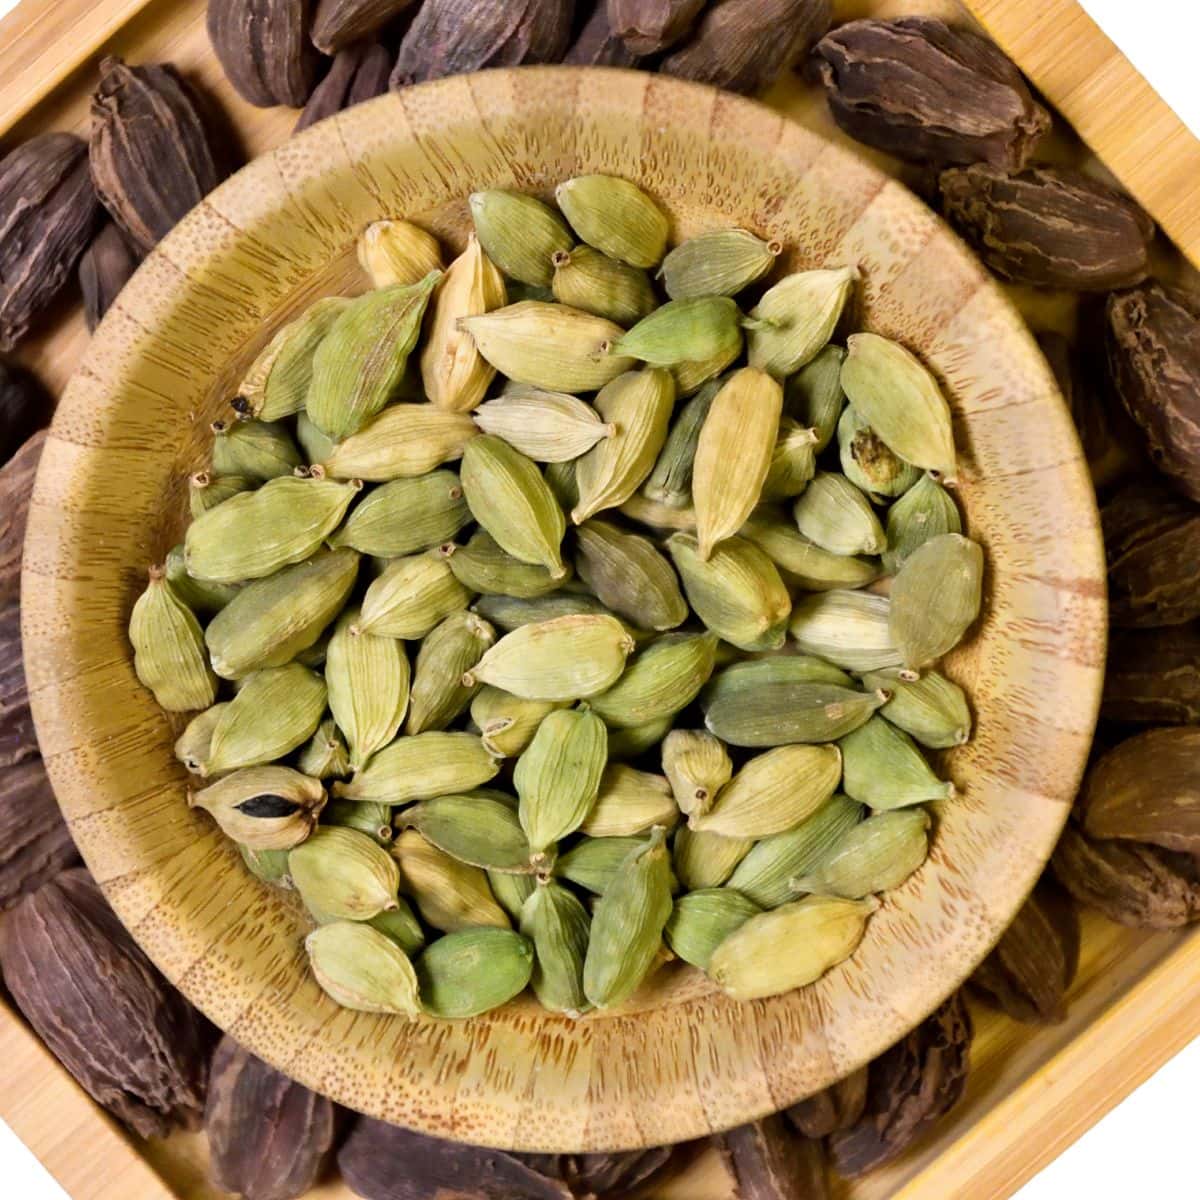 The best substitutes for cardamom